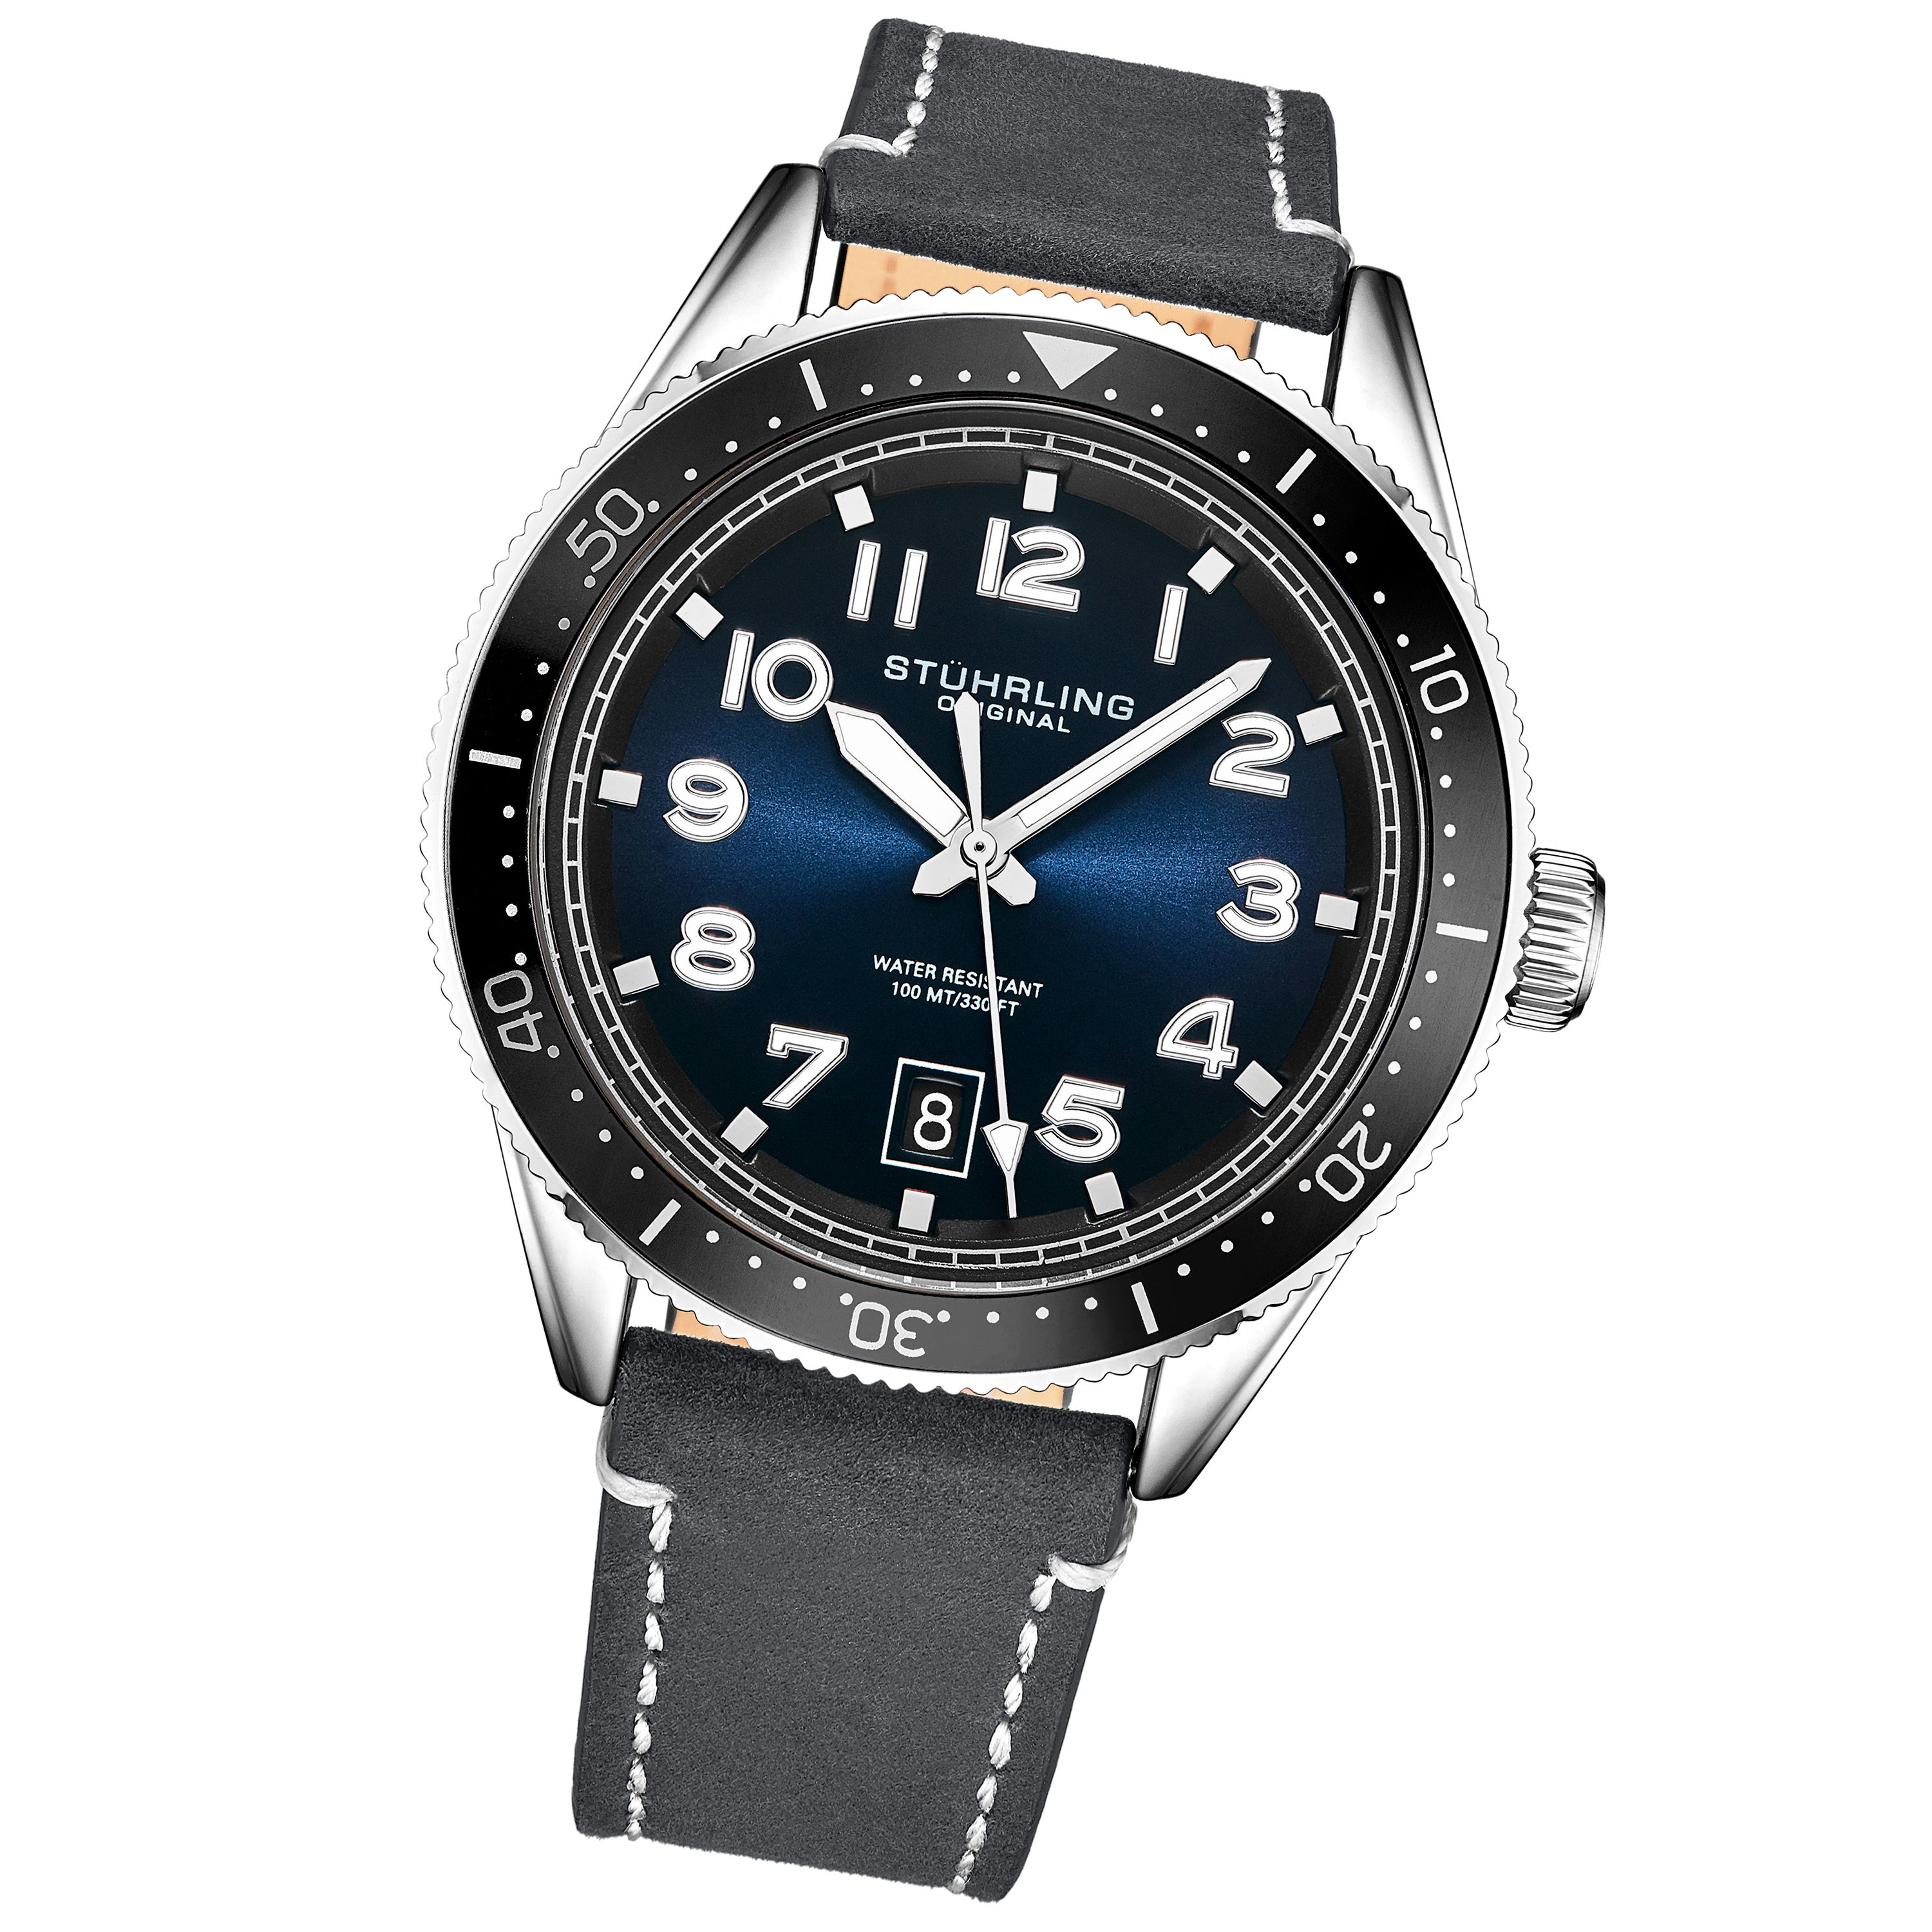 Men's Quartz Silver Case Watch, Black Bezel, Blue Dial, Luminous Silver Hands and Markers, Gray Leather Strap with White Contrast Stitching